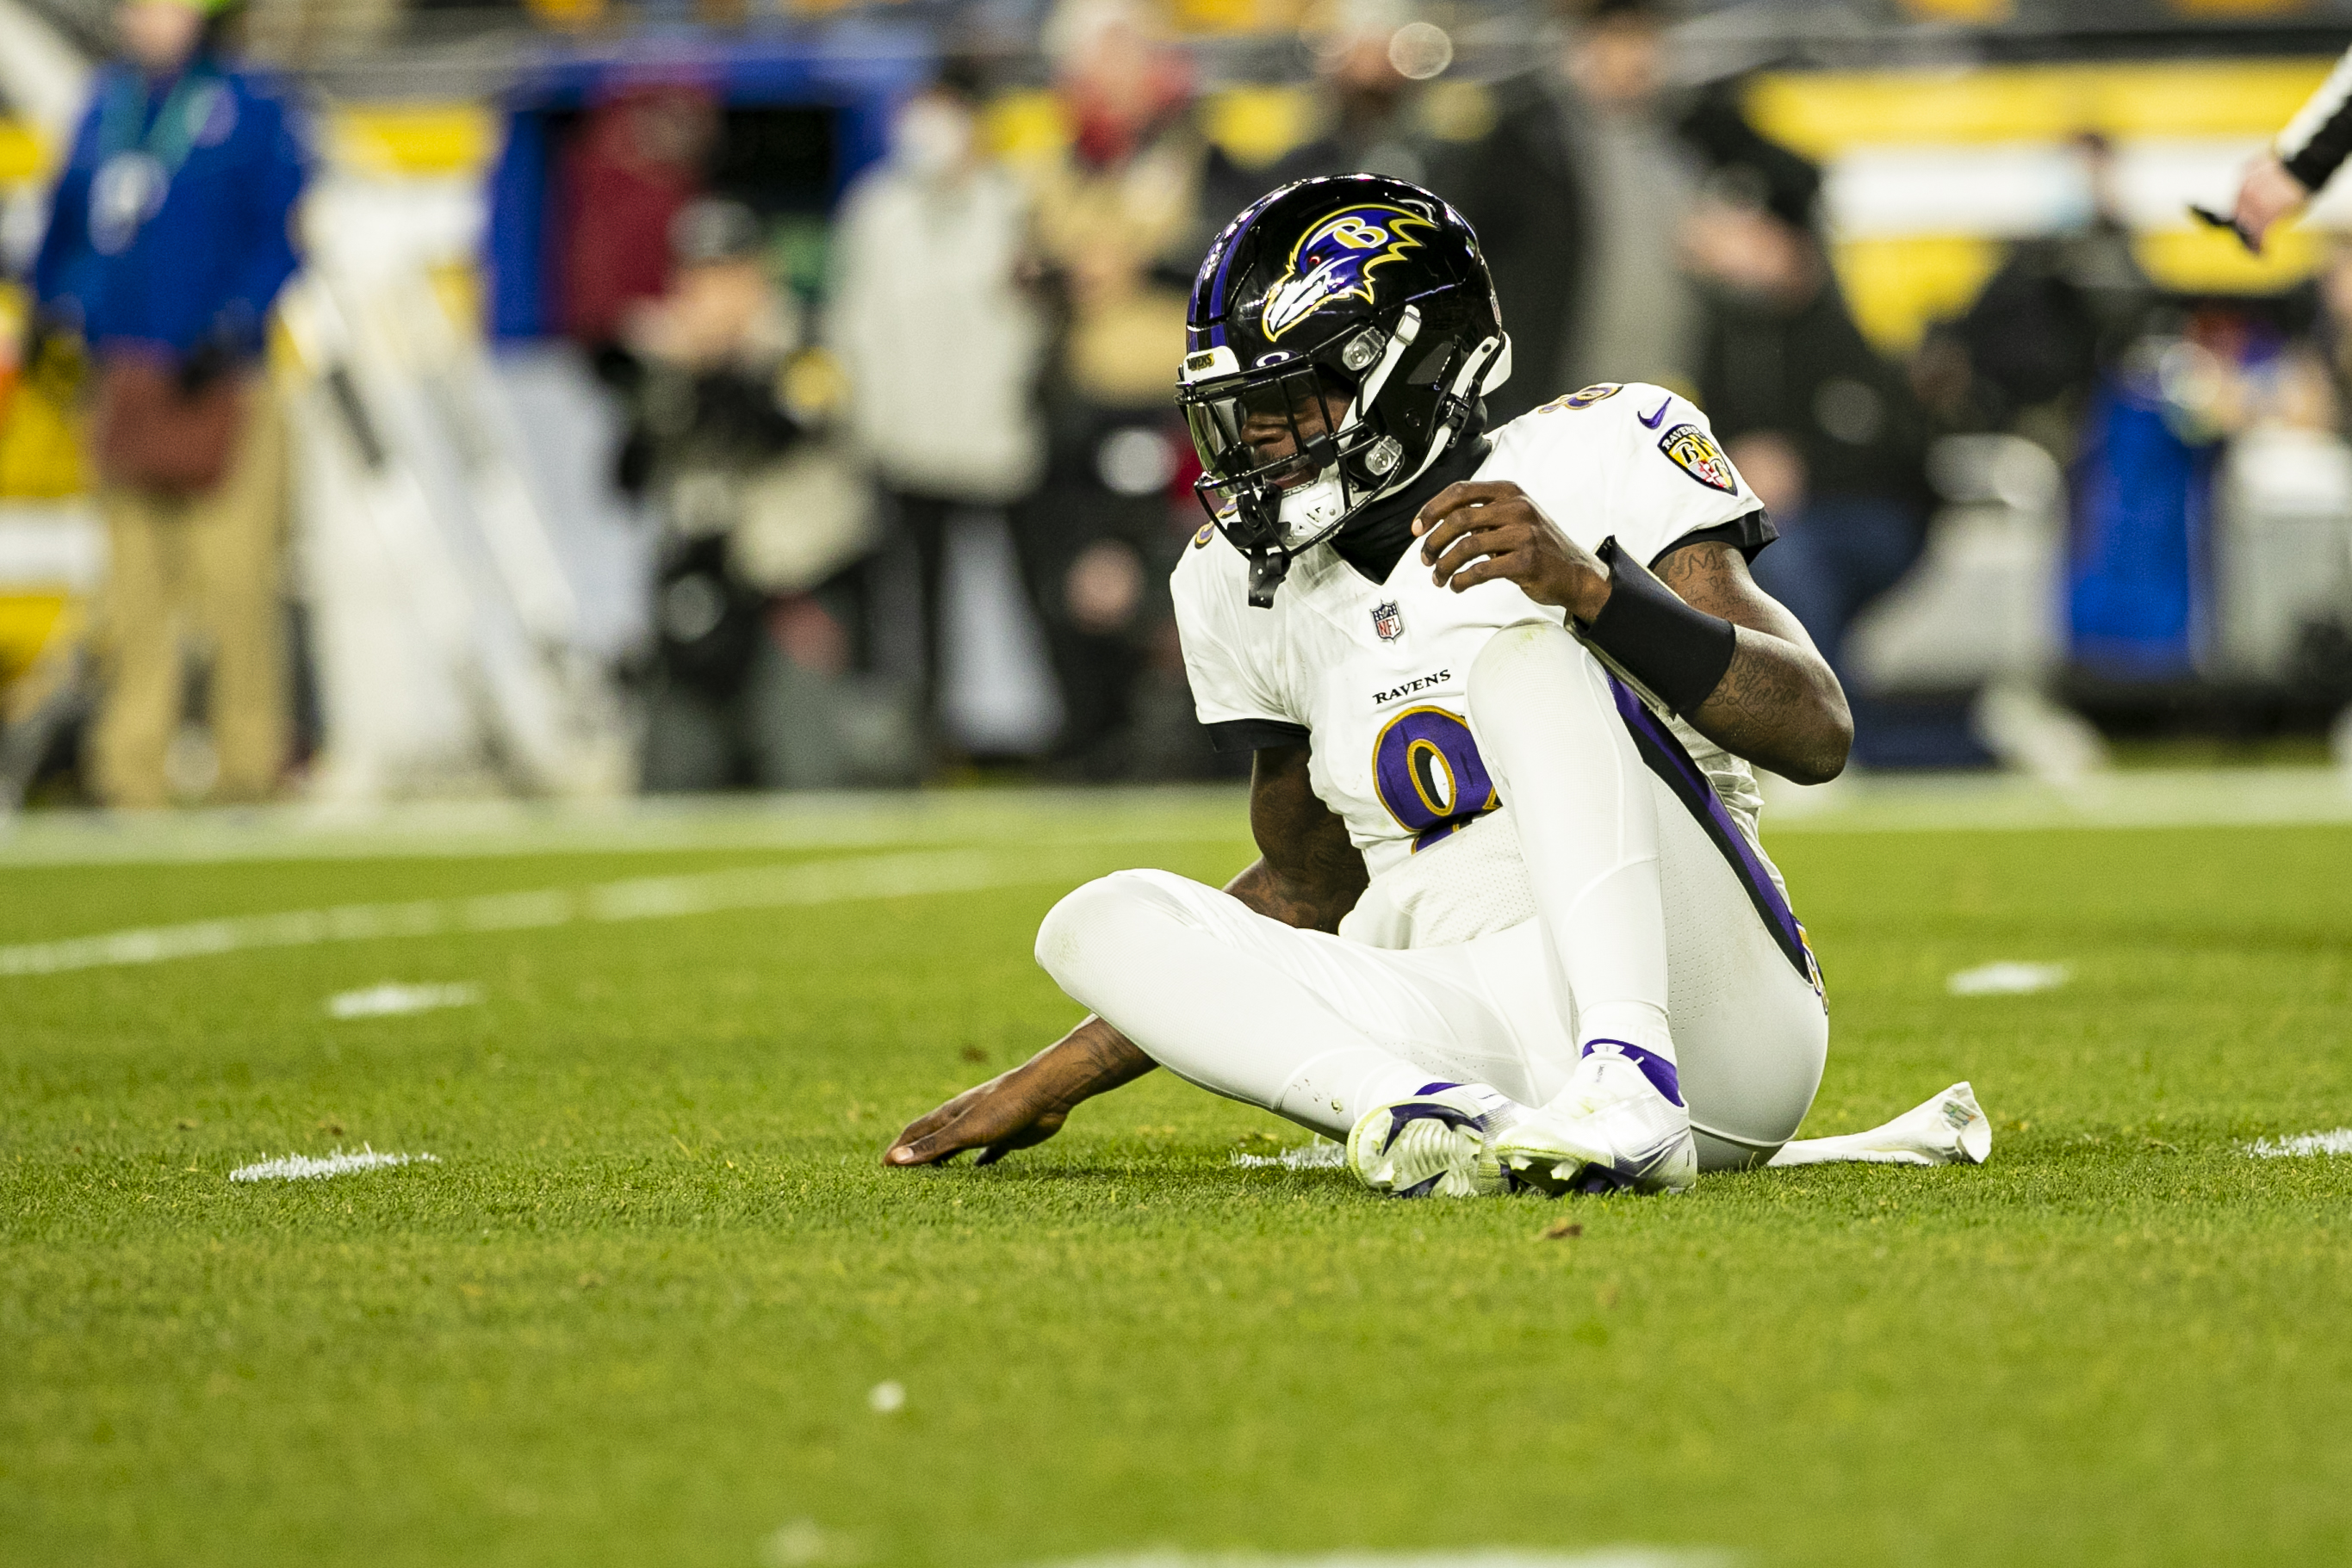 Lamar Jackson and the Ravens could be knocked out of NFL playoff contention in Week 17